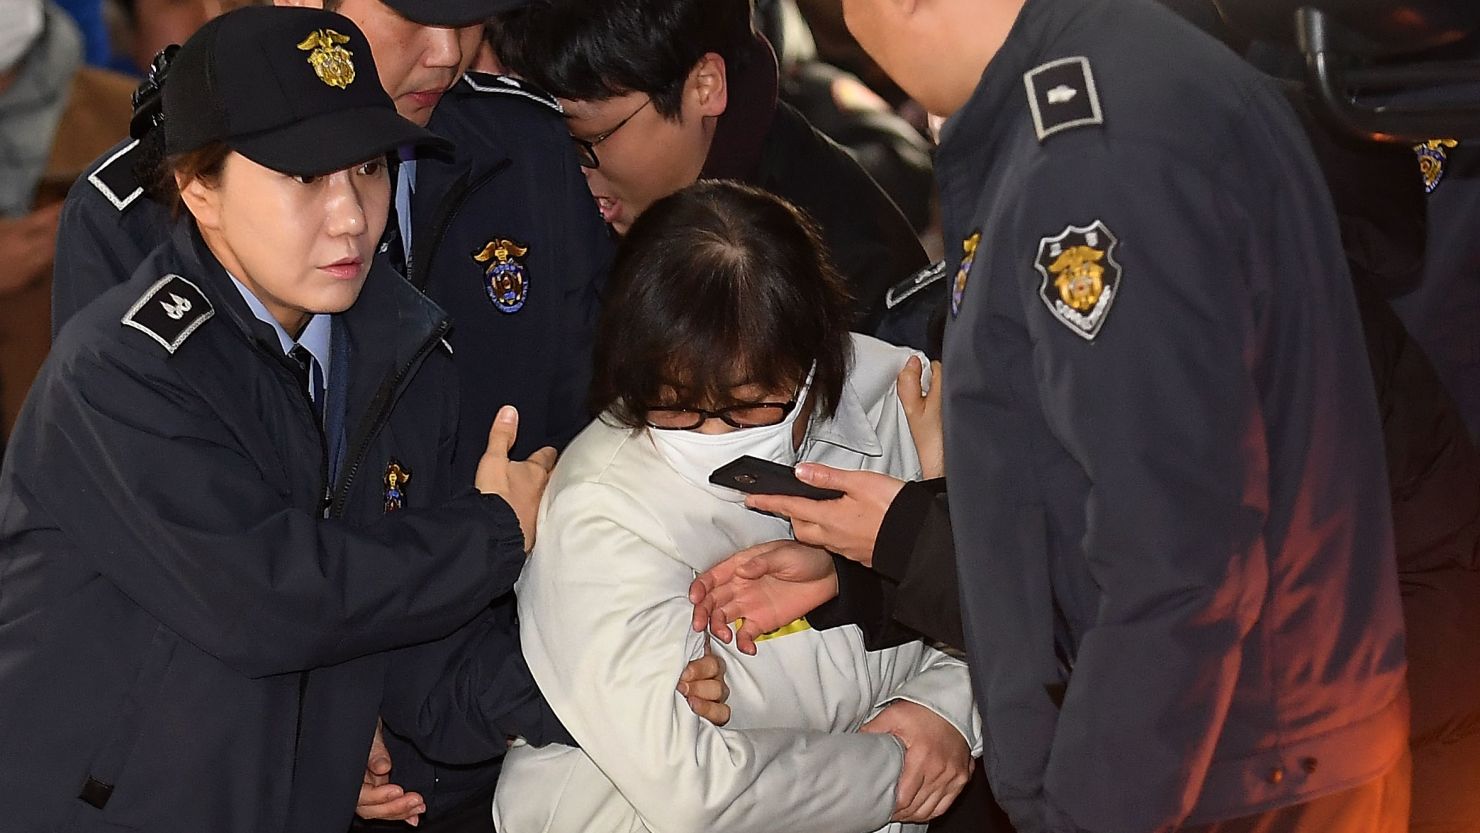 Choi Soon-Sil arrives for questioning on December 24, 2016 in Seoul, South Korea.